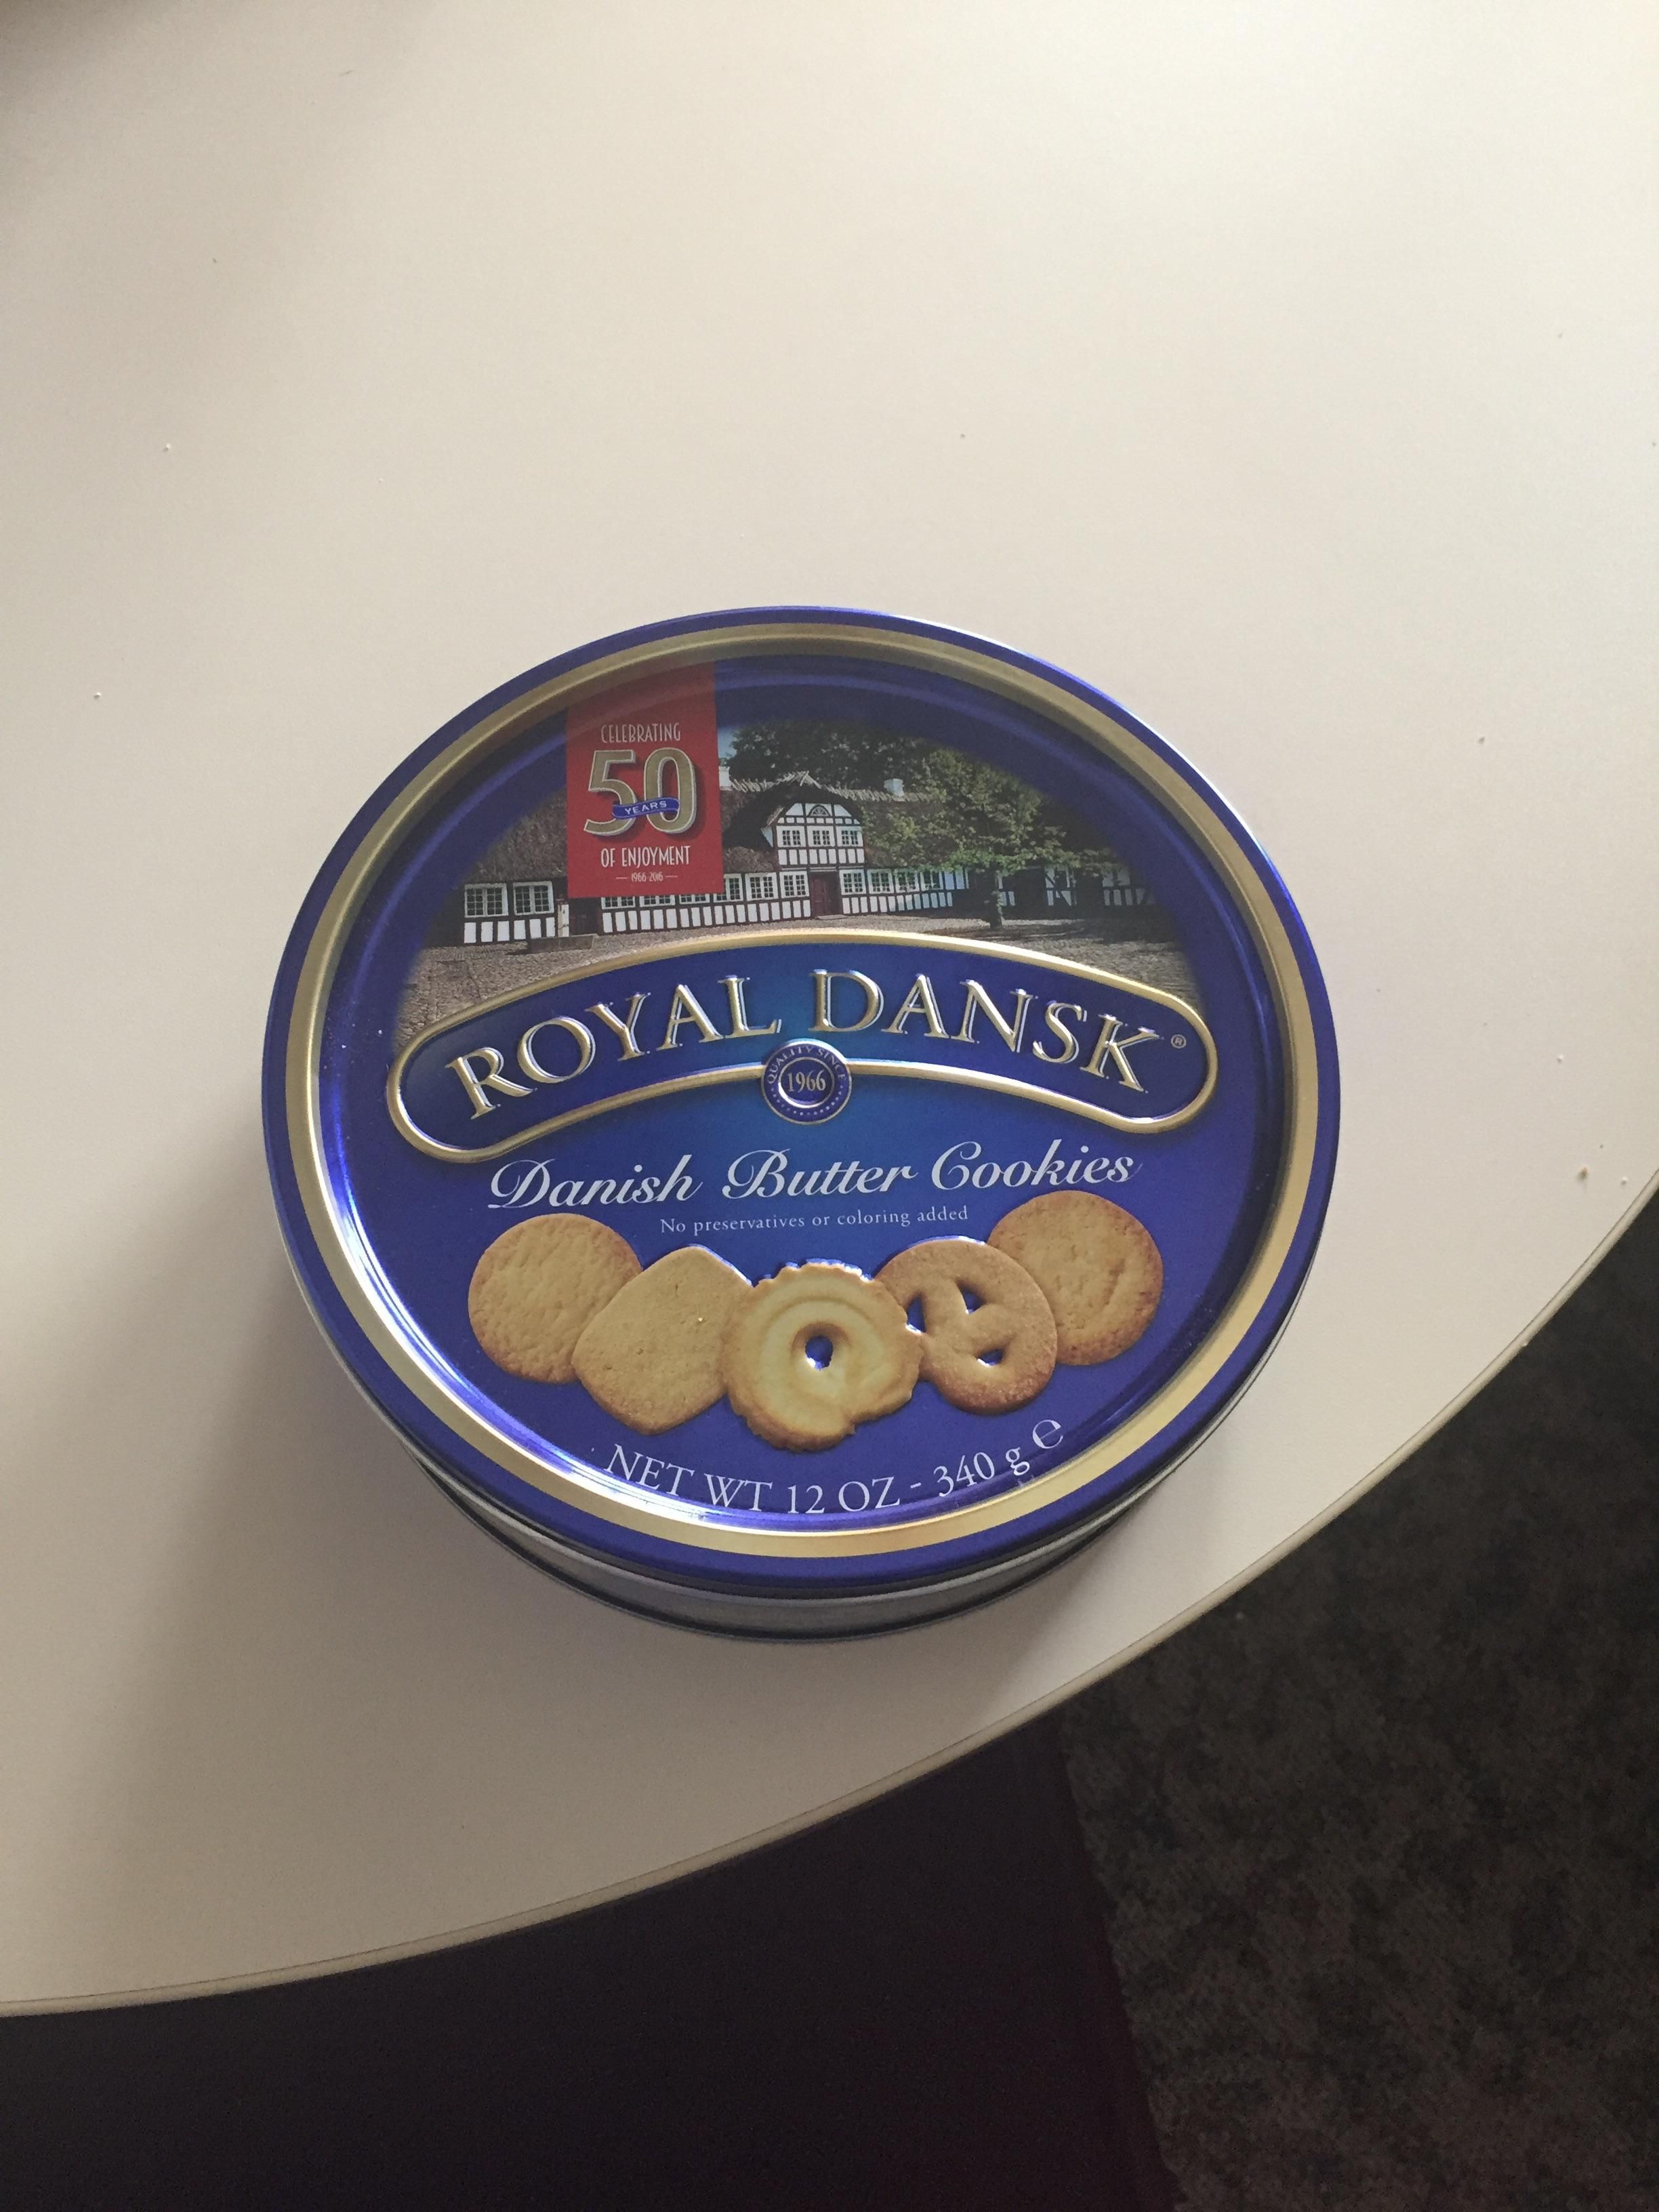 These cookies sat, untouched, on the table at work for nearly 2 weeks because it never occurred to anyone that there could be cookies inside.